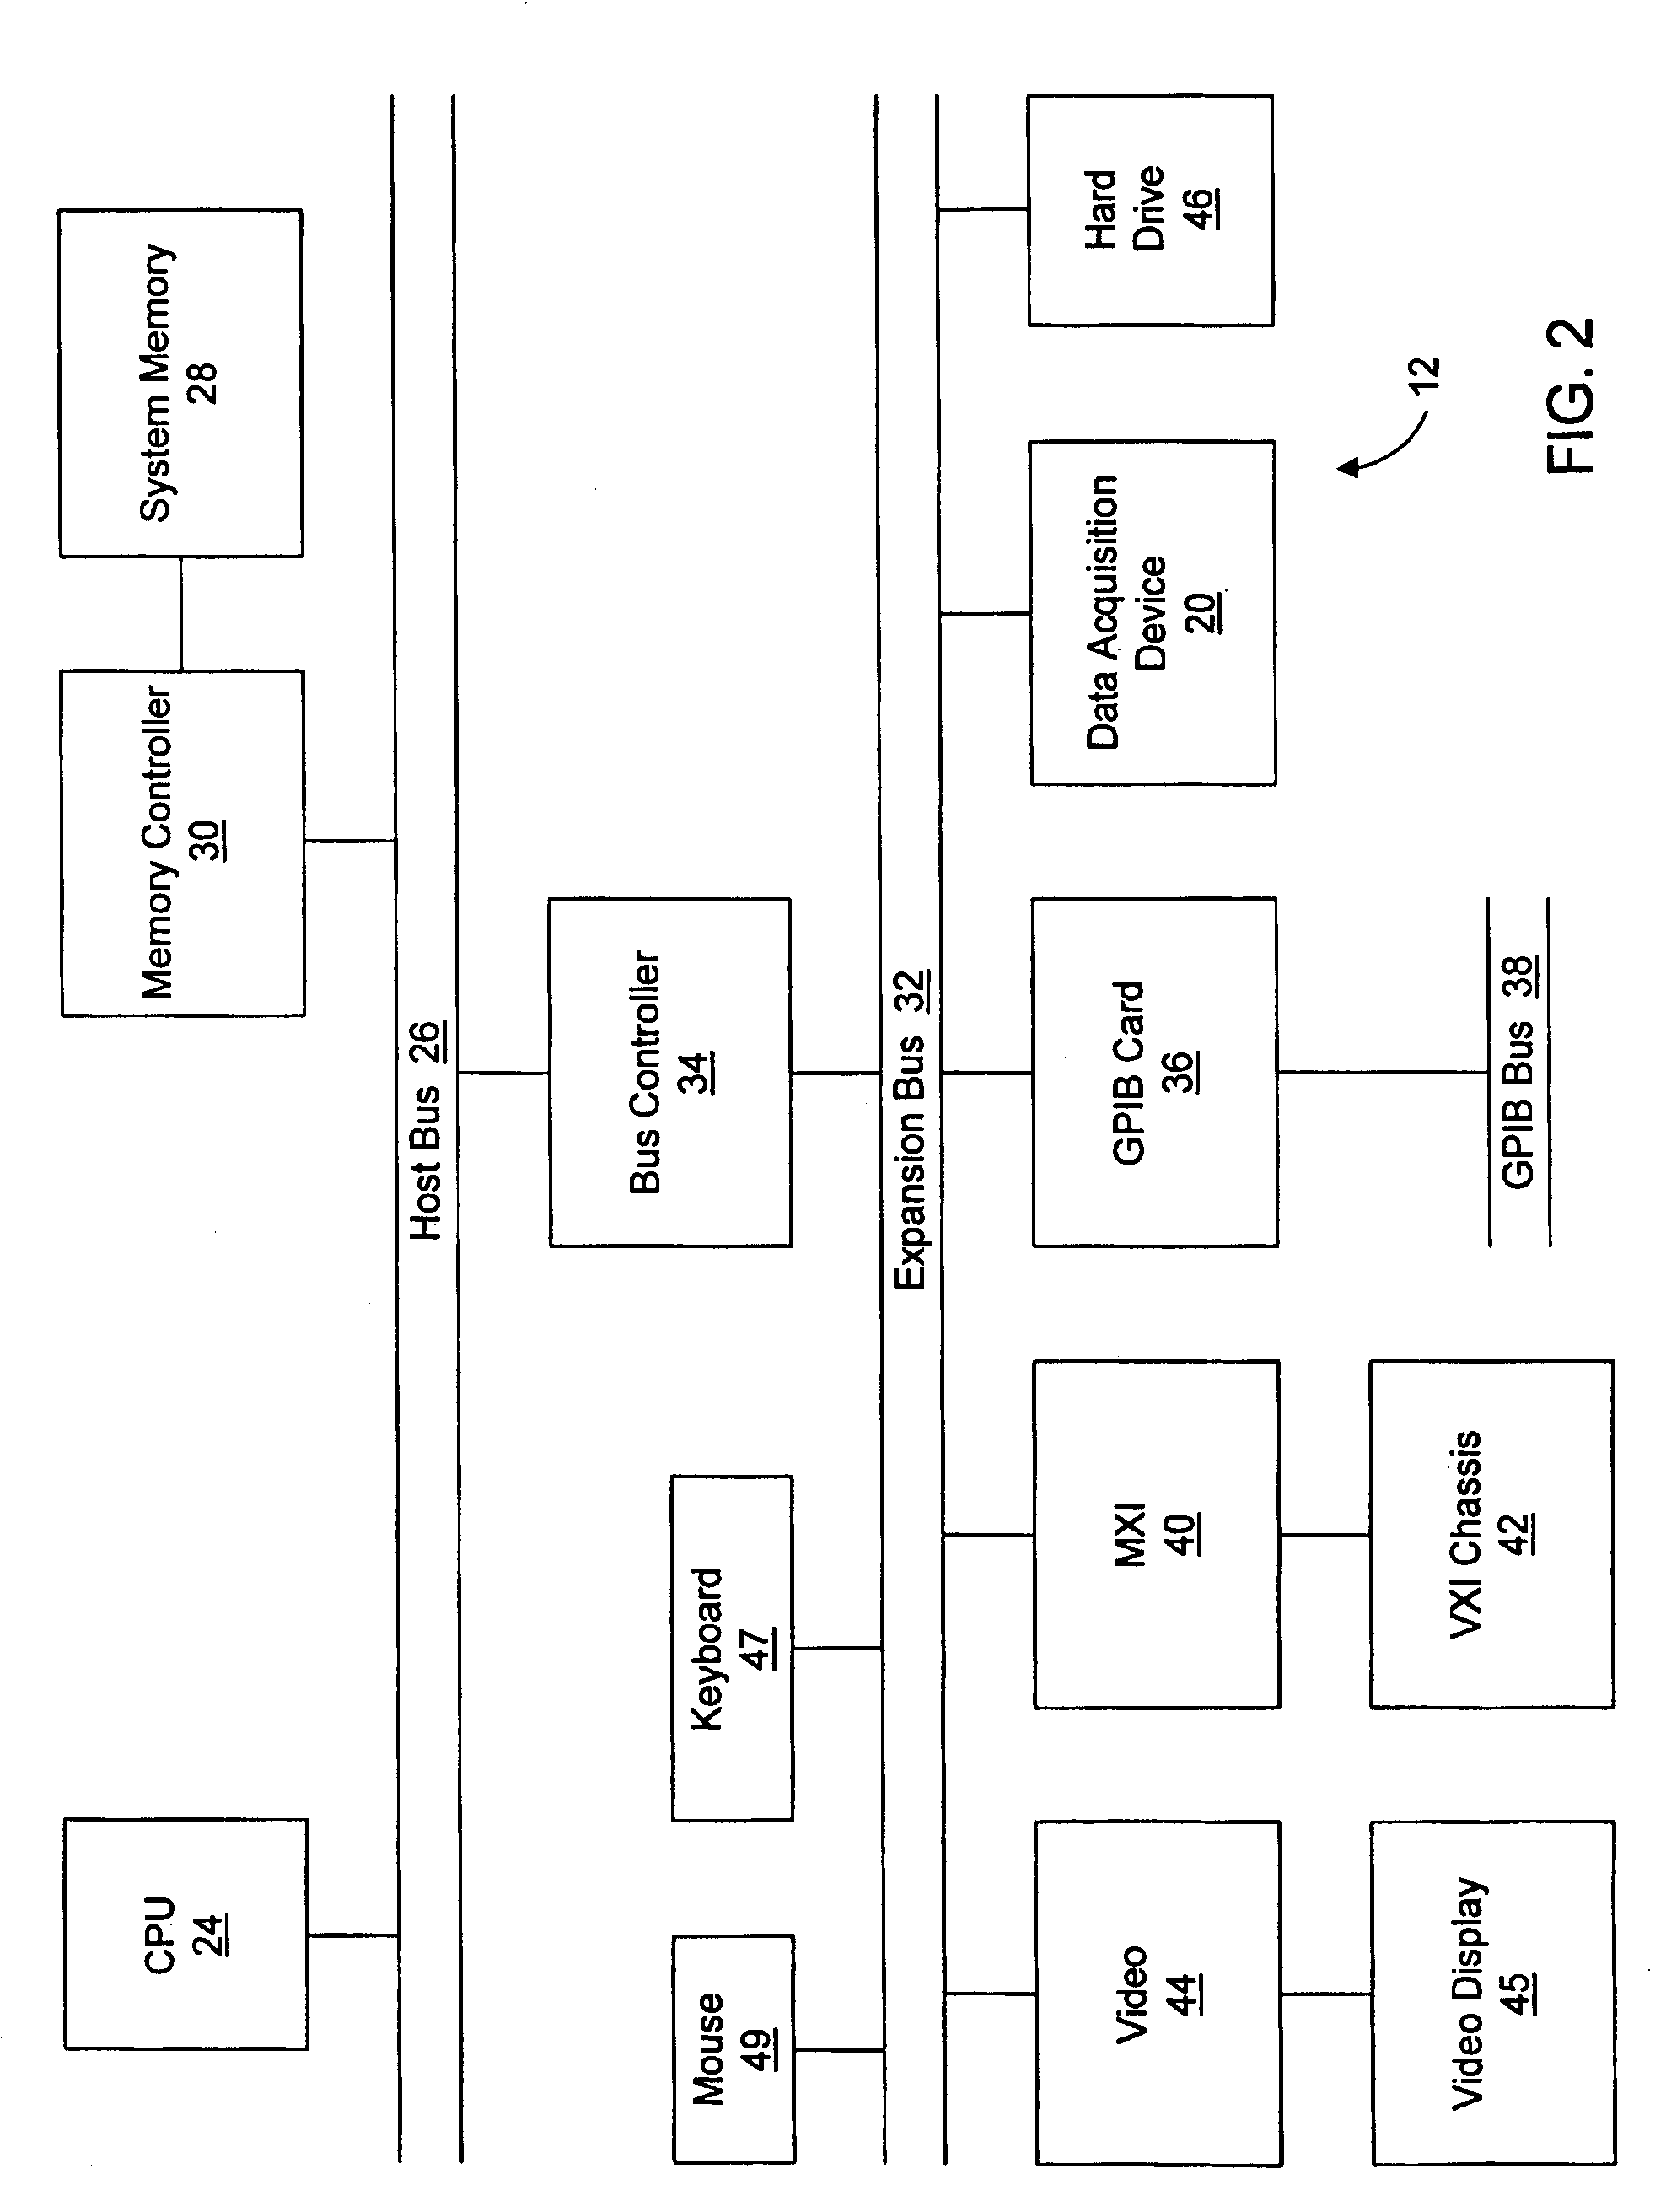 System and method for determining methods and properties to be invoked on objects in a graphical program